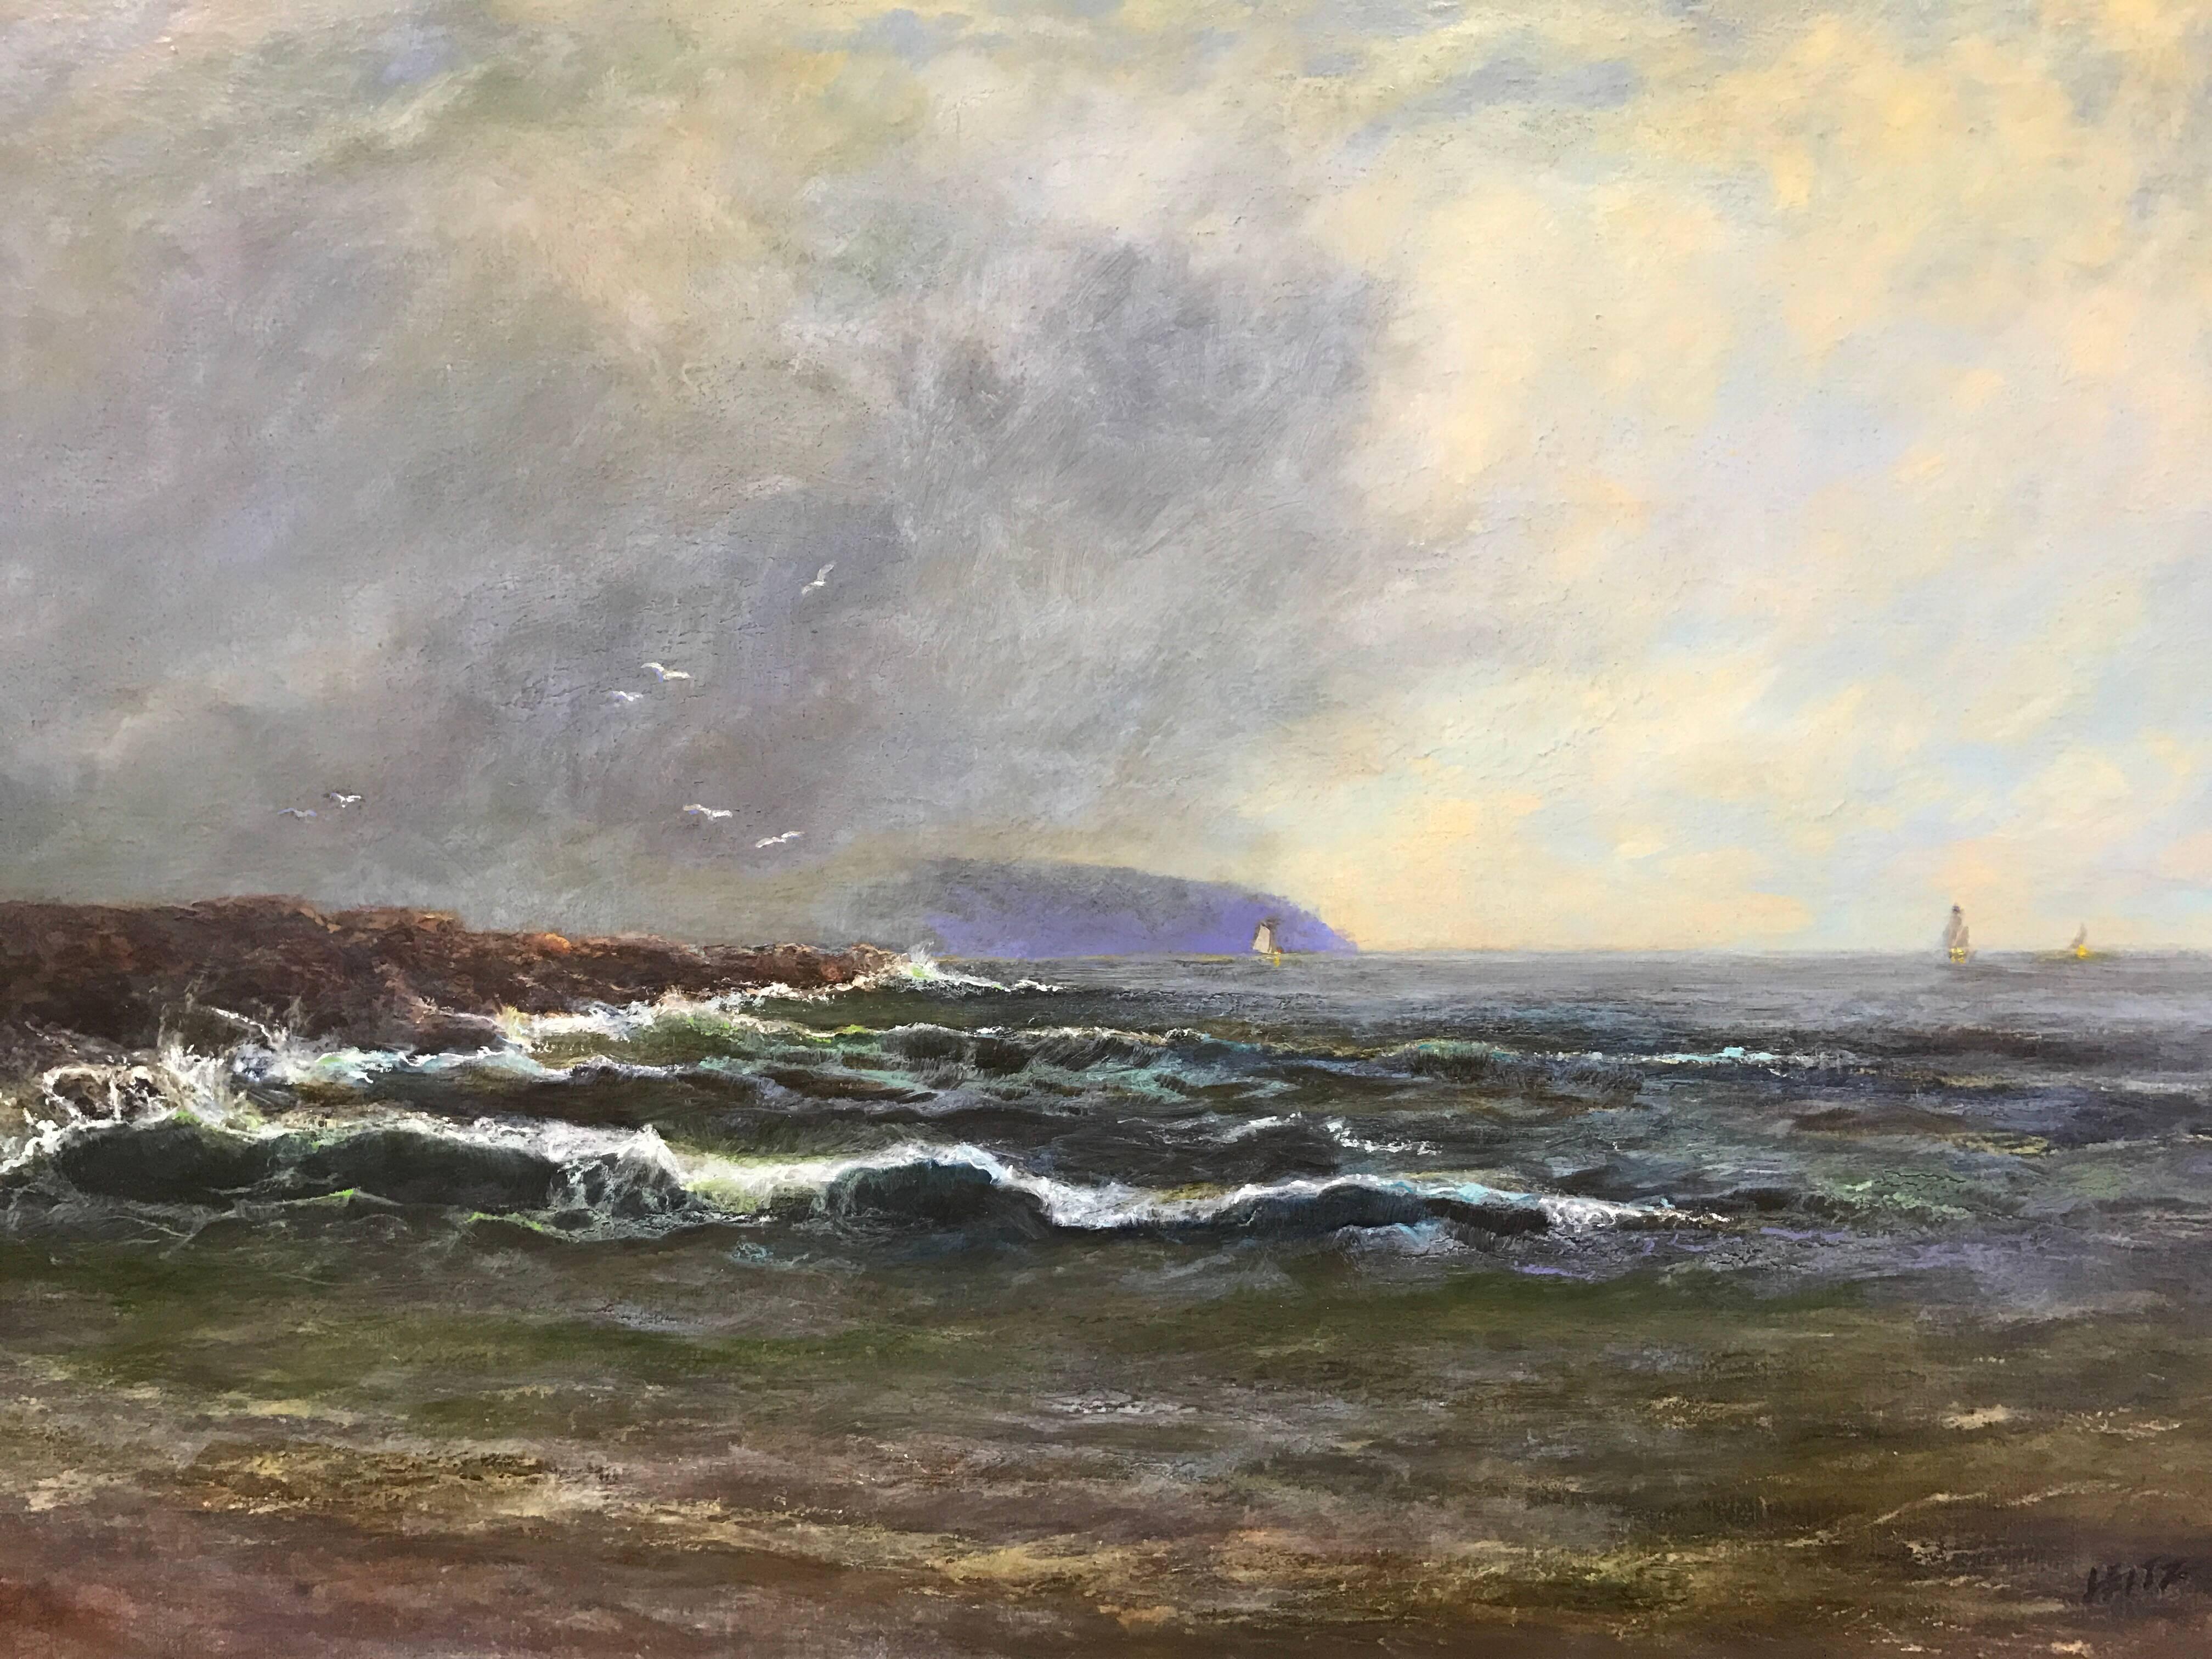 Stunning original oil on linen painting of Charles Island Squall seascape. Signed by acclaimed American artist Jeffrey Leitz, Connecticut. Features 22-karat gold leaf closed-corner frame by Boston, MA frame maker, Guido Studios. Unframed dimensions